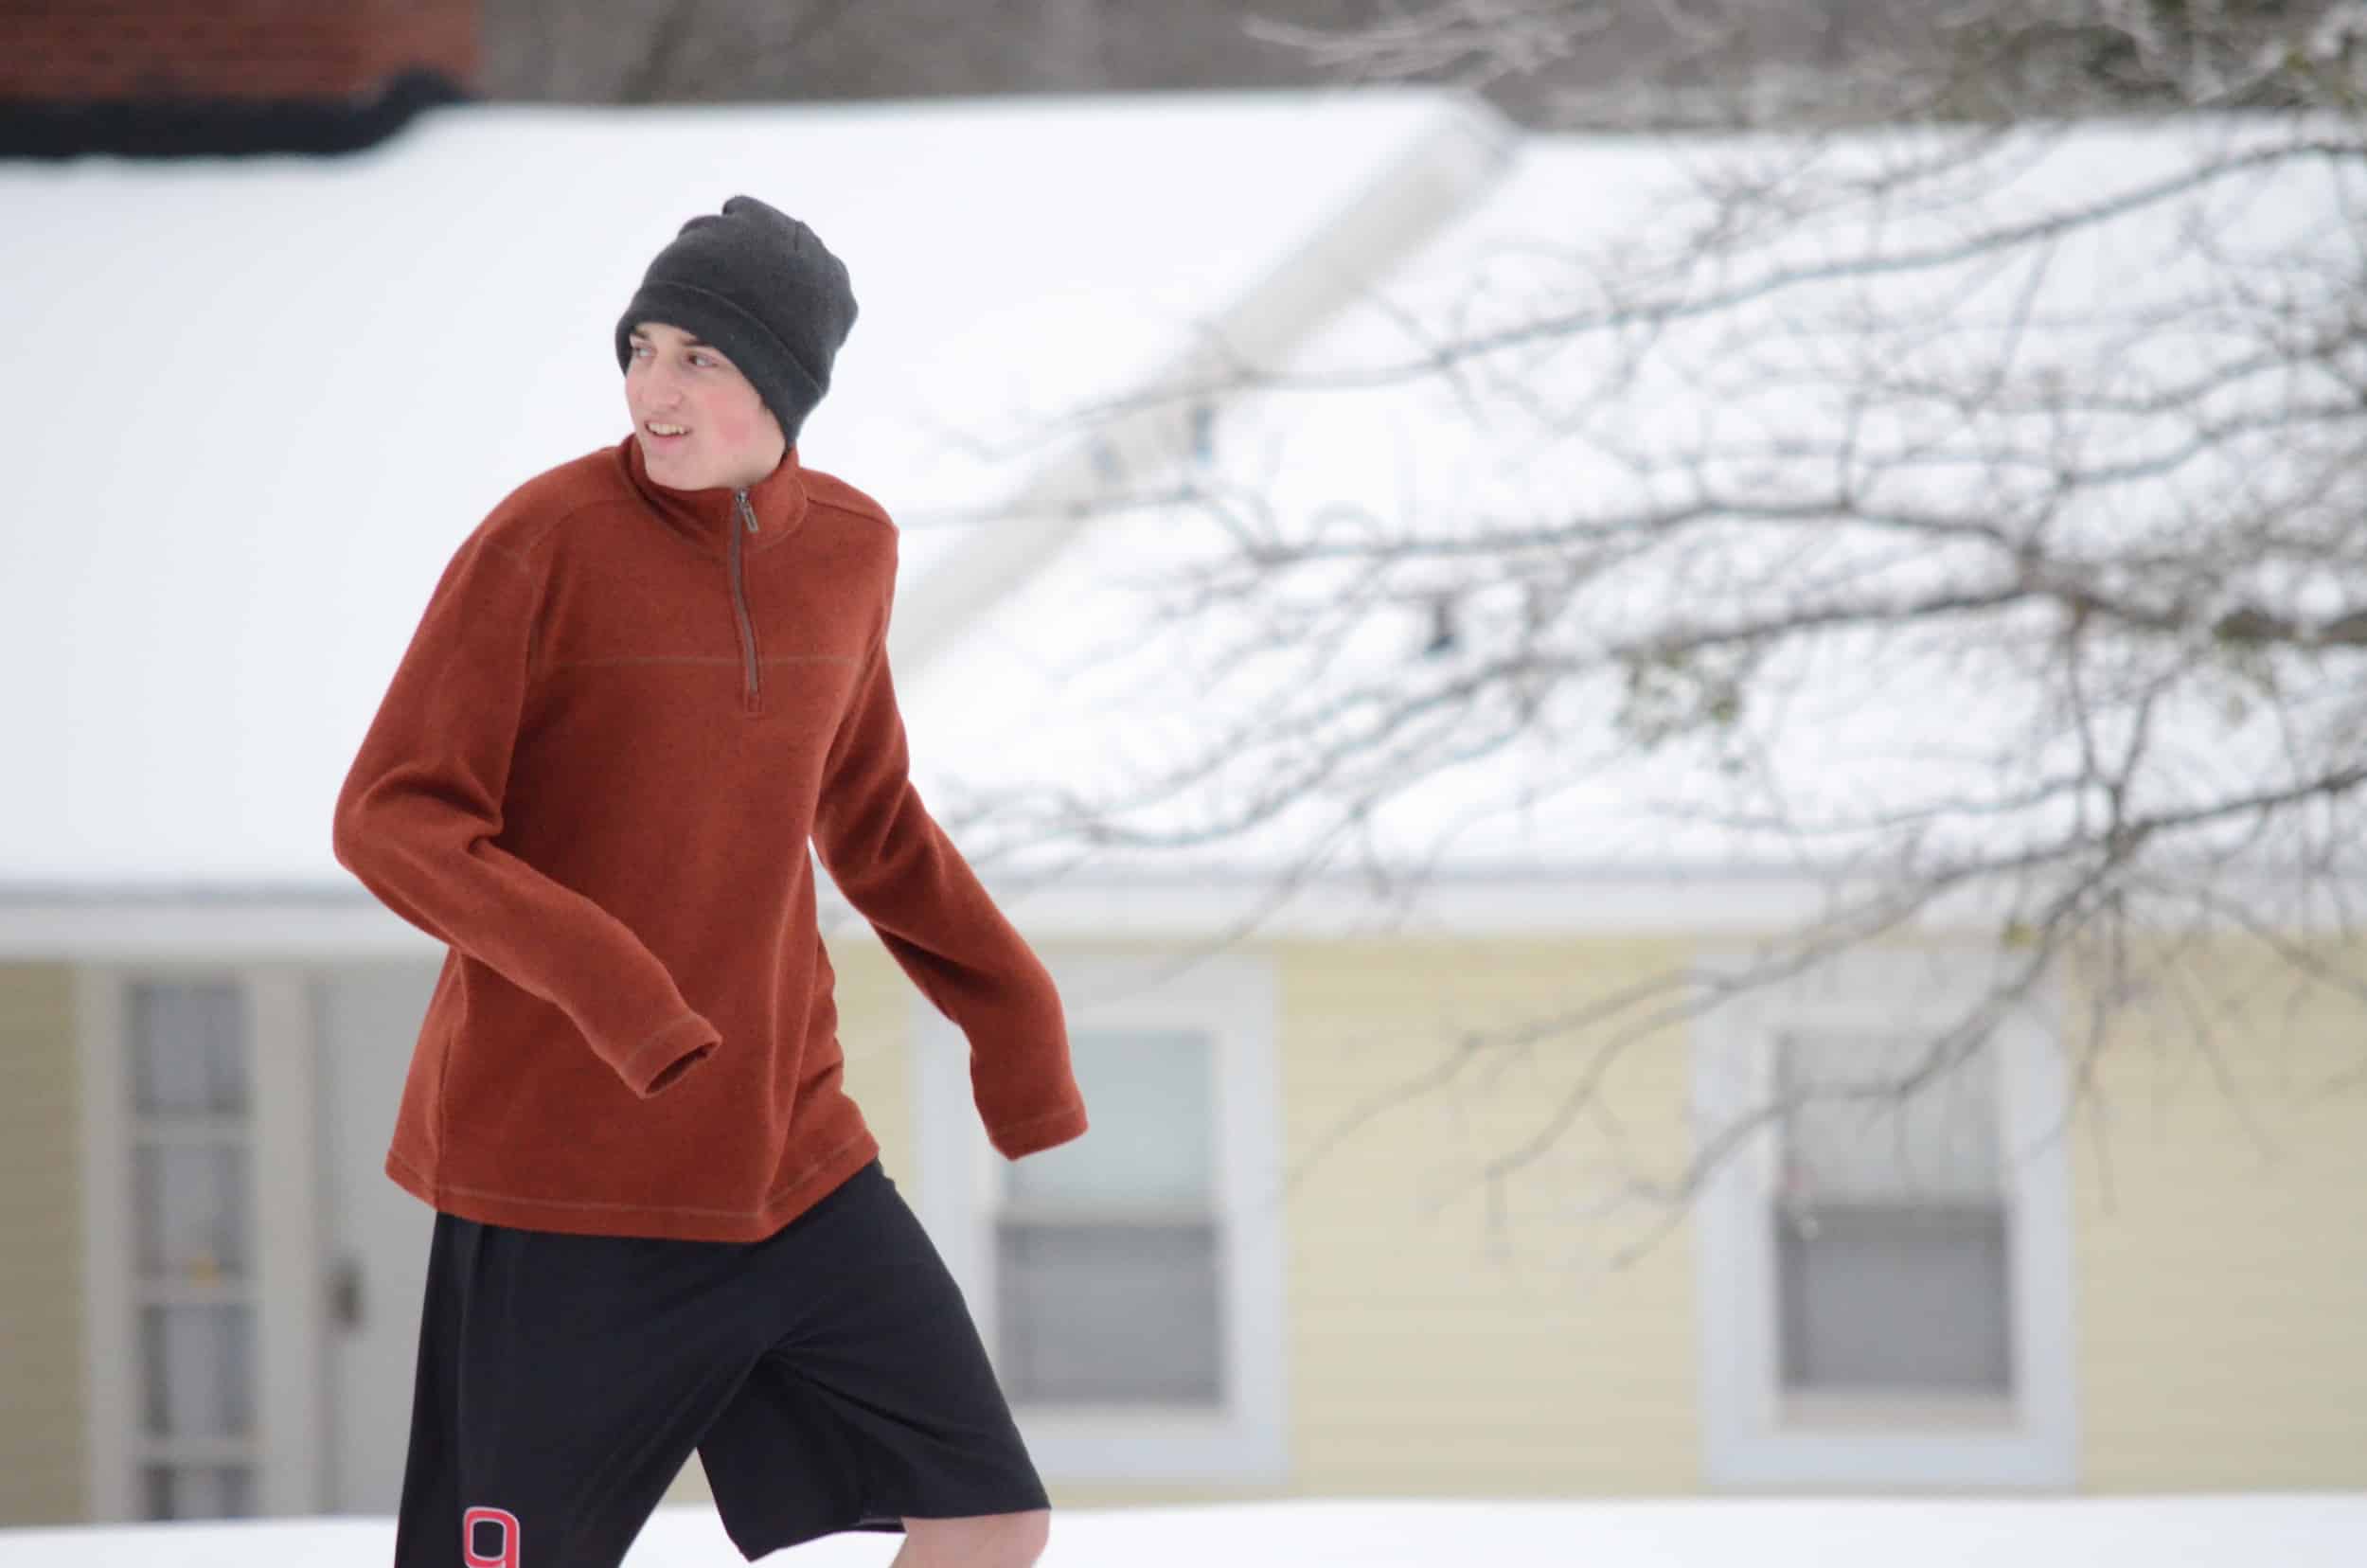 ryan Langston, what are you thinking wearing shorts in the snow?Photo by: Rebecca Meek